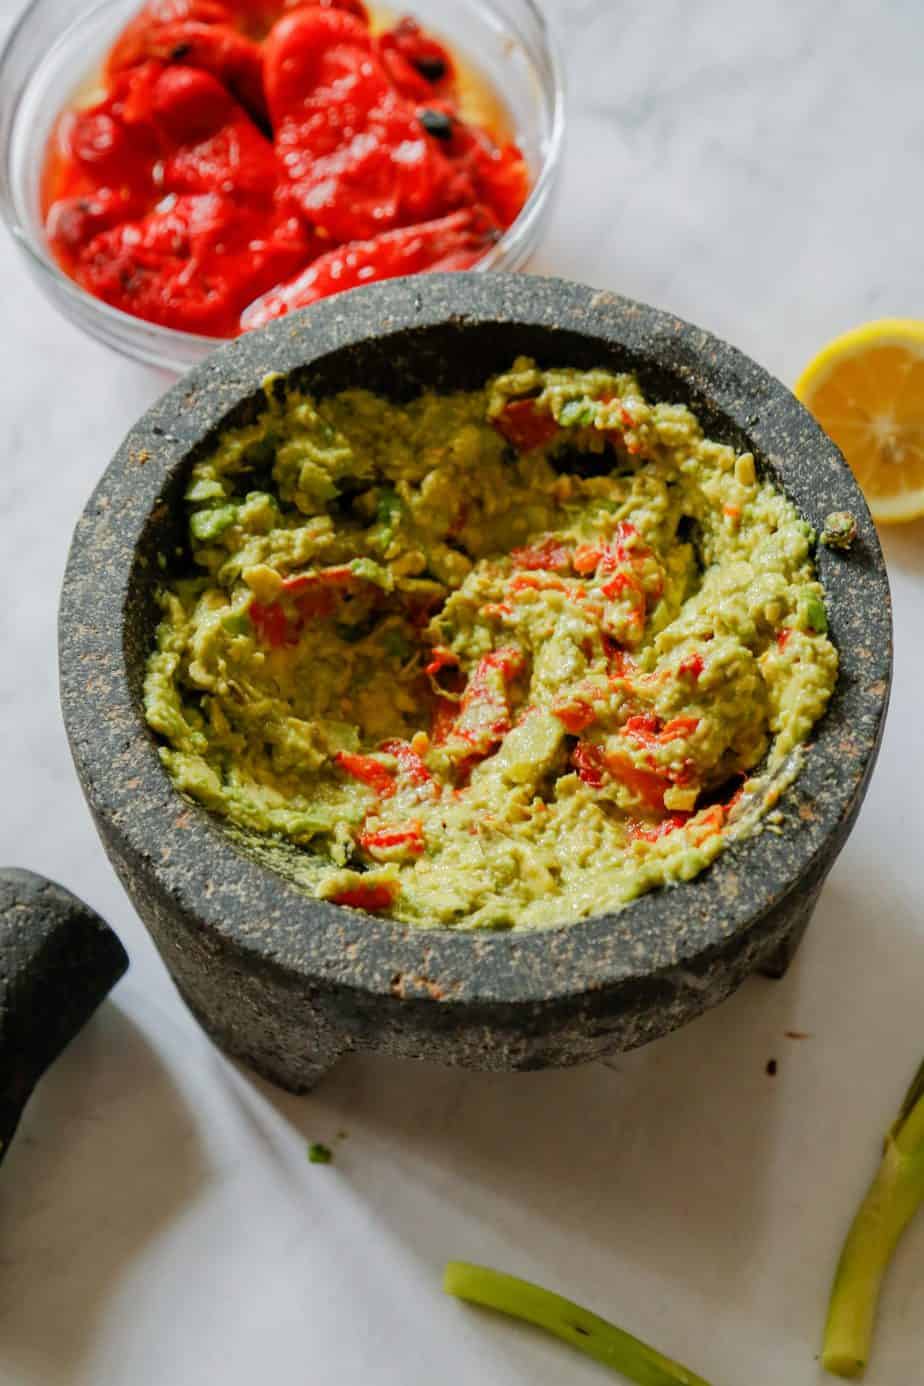 Healthy Guacamole with Roasted Peppers and Cumin - A refreshing take on an old favorite.  You'll love dipping into this smokey and rich ultra healthy guacamole.  This recipe has only 5 ingredients and a few minutes to make You can enjoy it as a side dish or load it on top of salads.  There are endless ways to enjoy this creamy and healthy guacamole recipe. #avocados #roastedpeppers #vegan #guacamole #guacamolerecipe #avocadorecipe #veganrecipe"